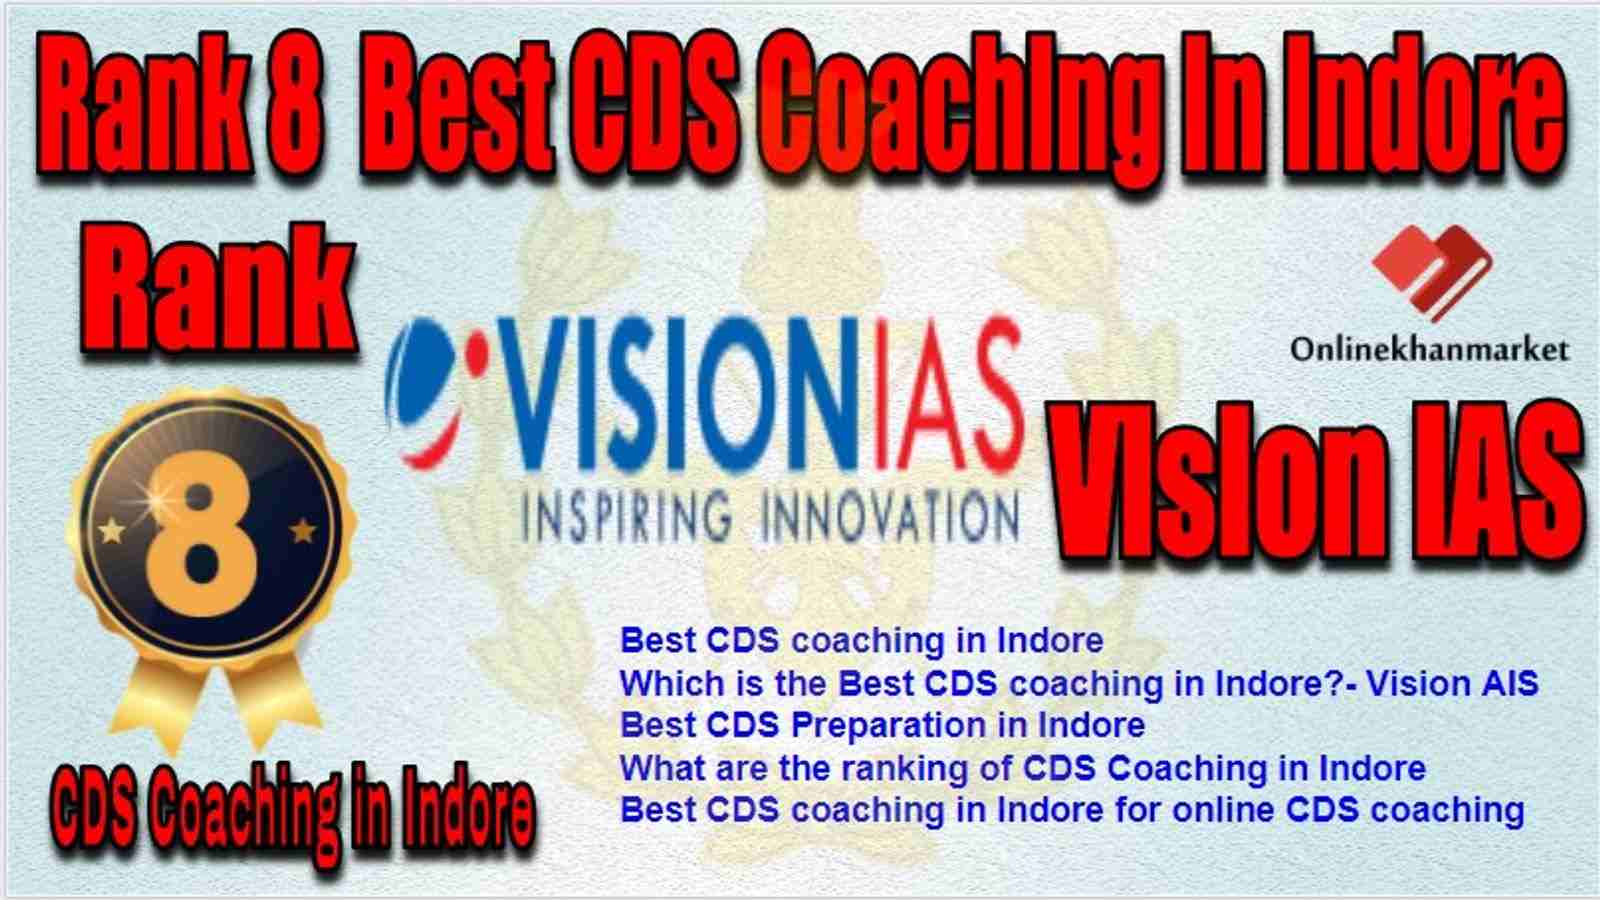 Rank 8 Best CDS Coaching in indore